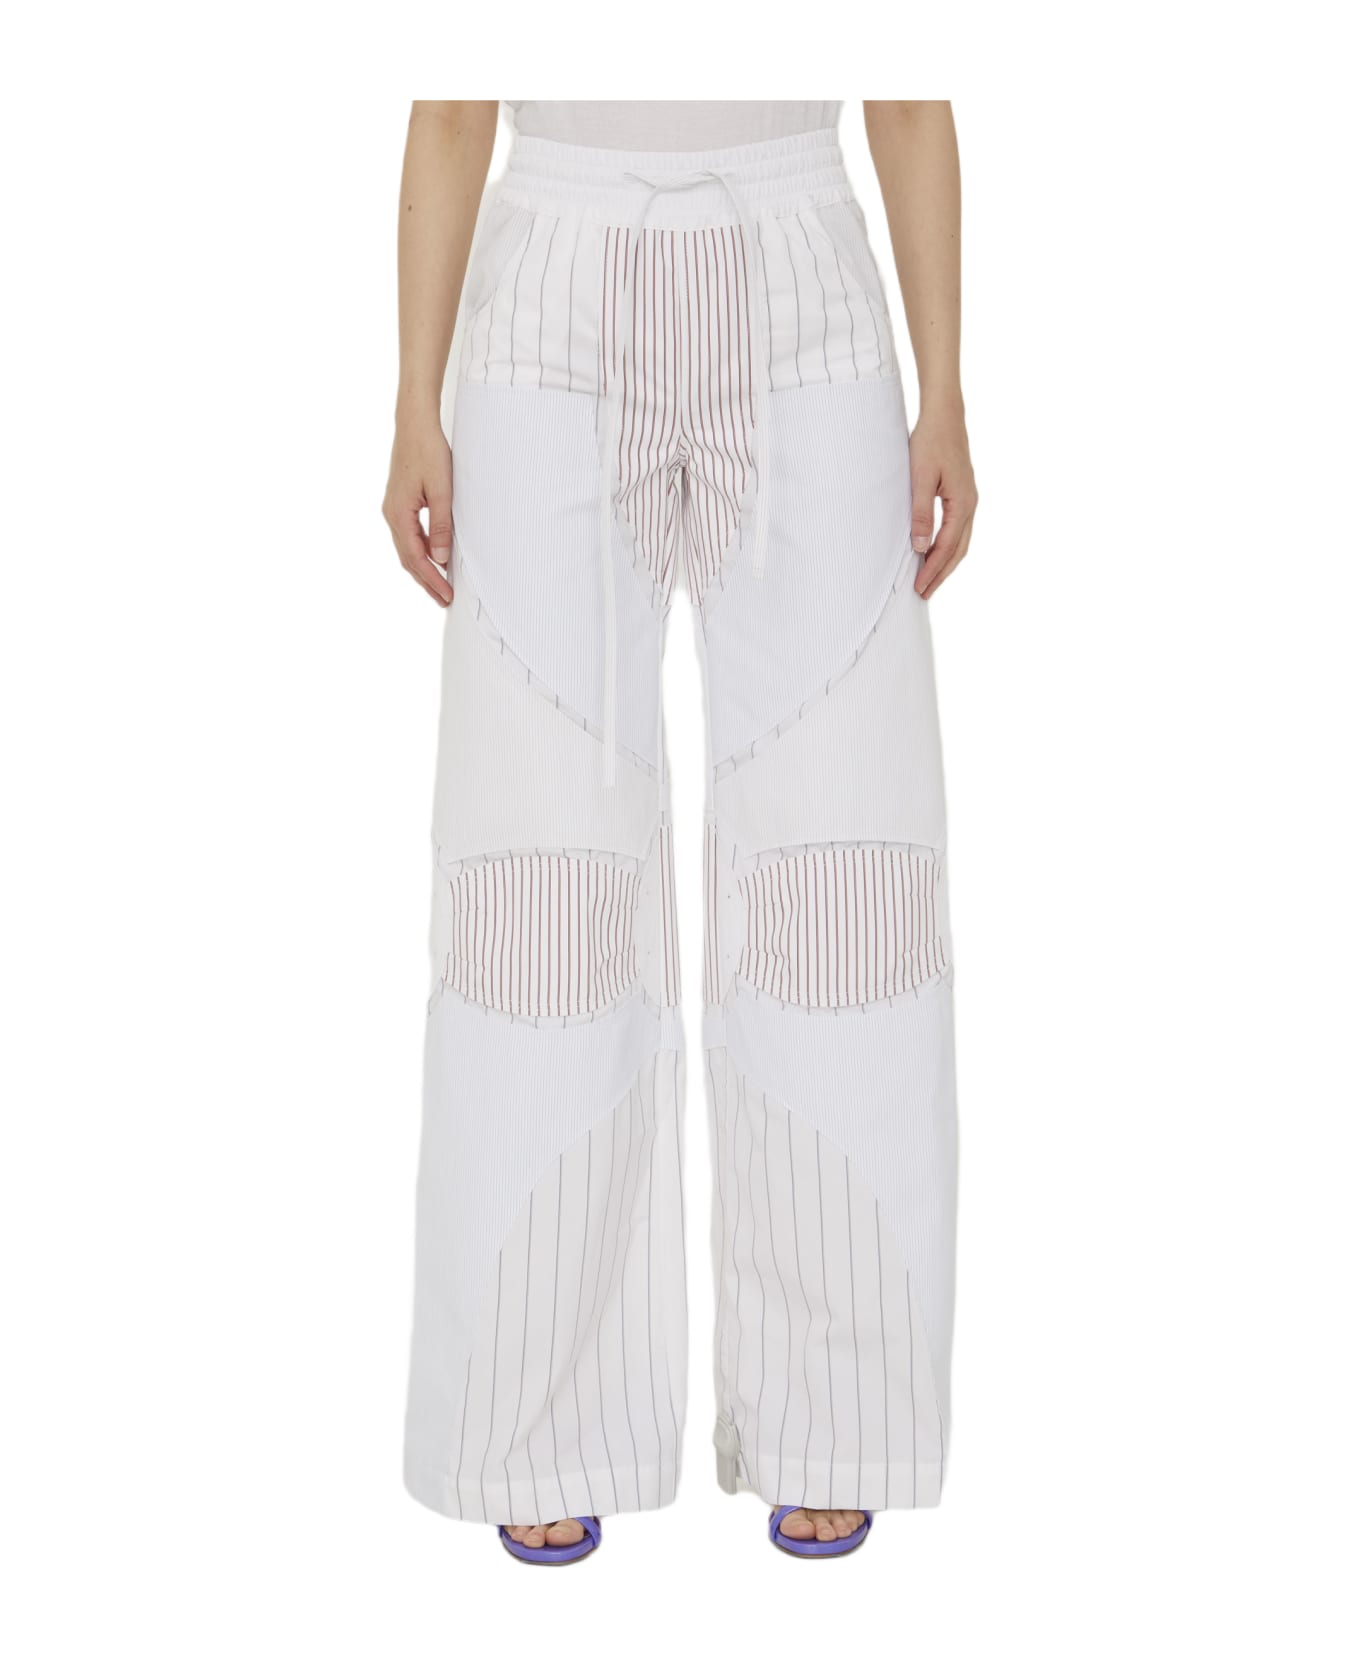 Off-White Motorcycle Pants - WHITE